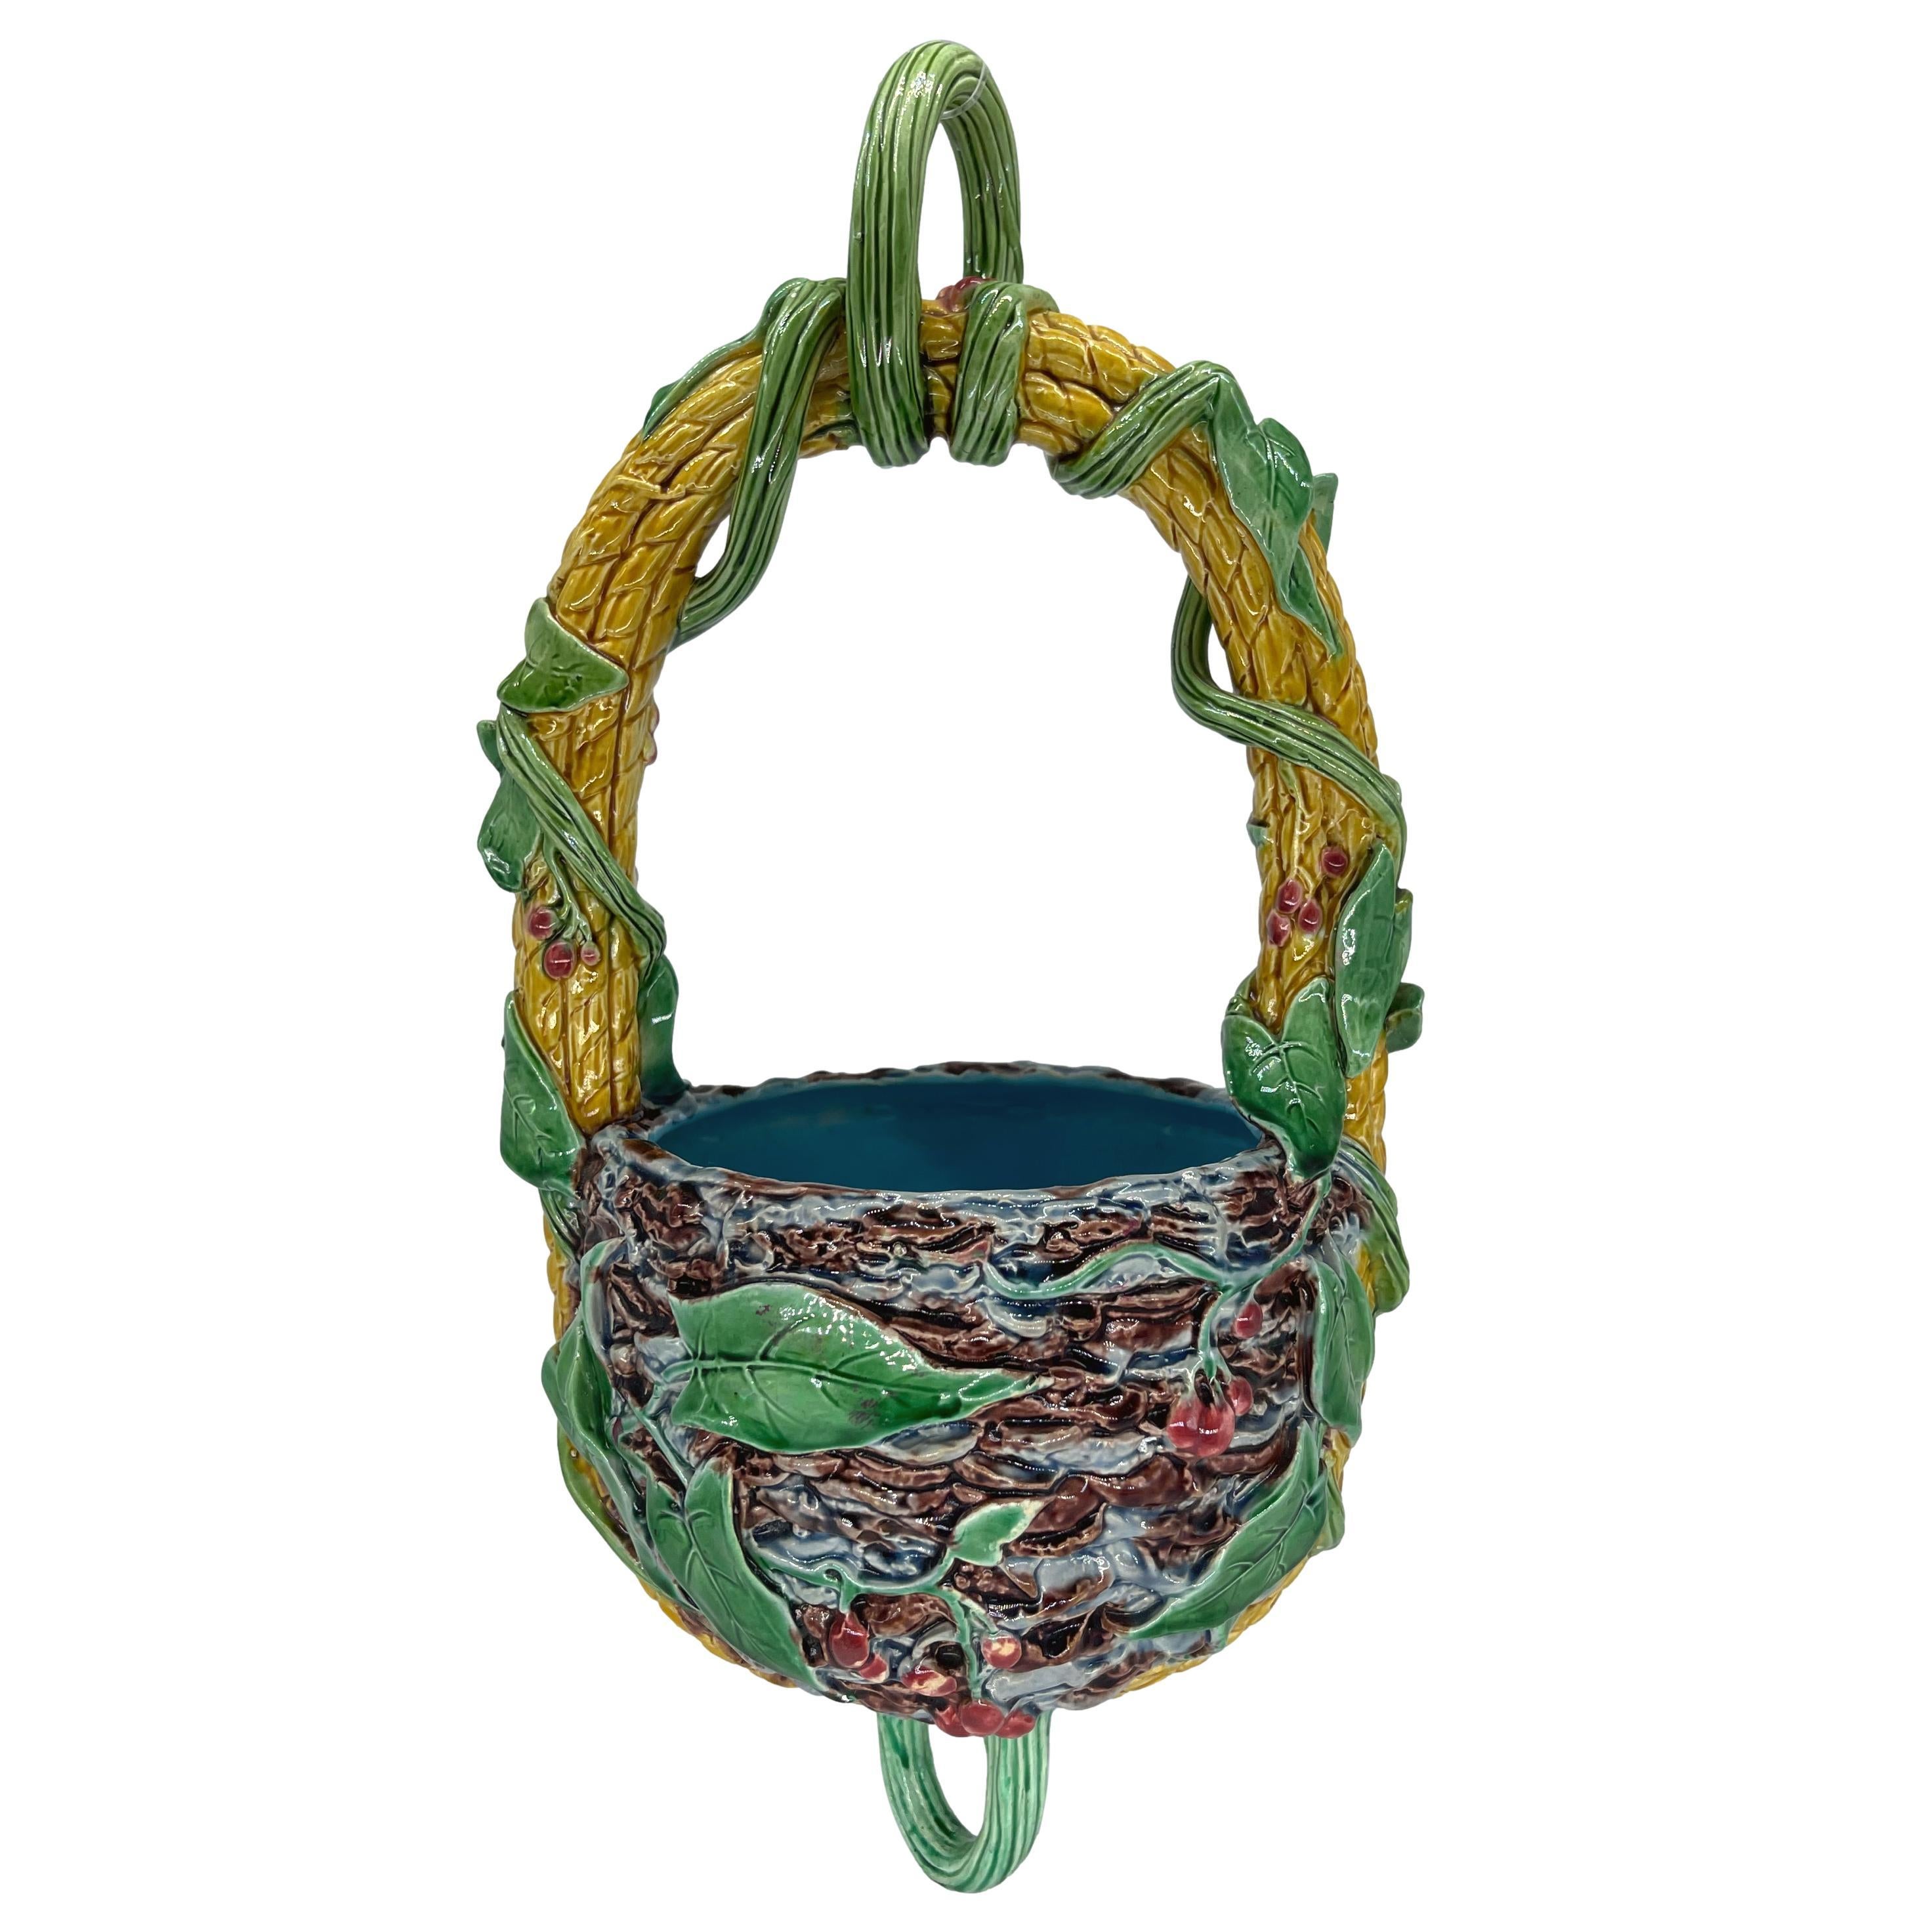 Minton Majolica Hanging Planter/Basket, the planter molded as a birds nest with red glazed cherries and green leaves, the interior glazed in turquoise, the woven bail handle glazed in yellow, with leaves, tendrils, and vines, surmounted by a looped